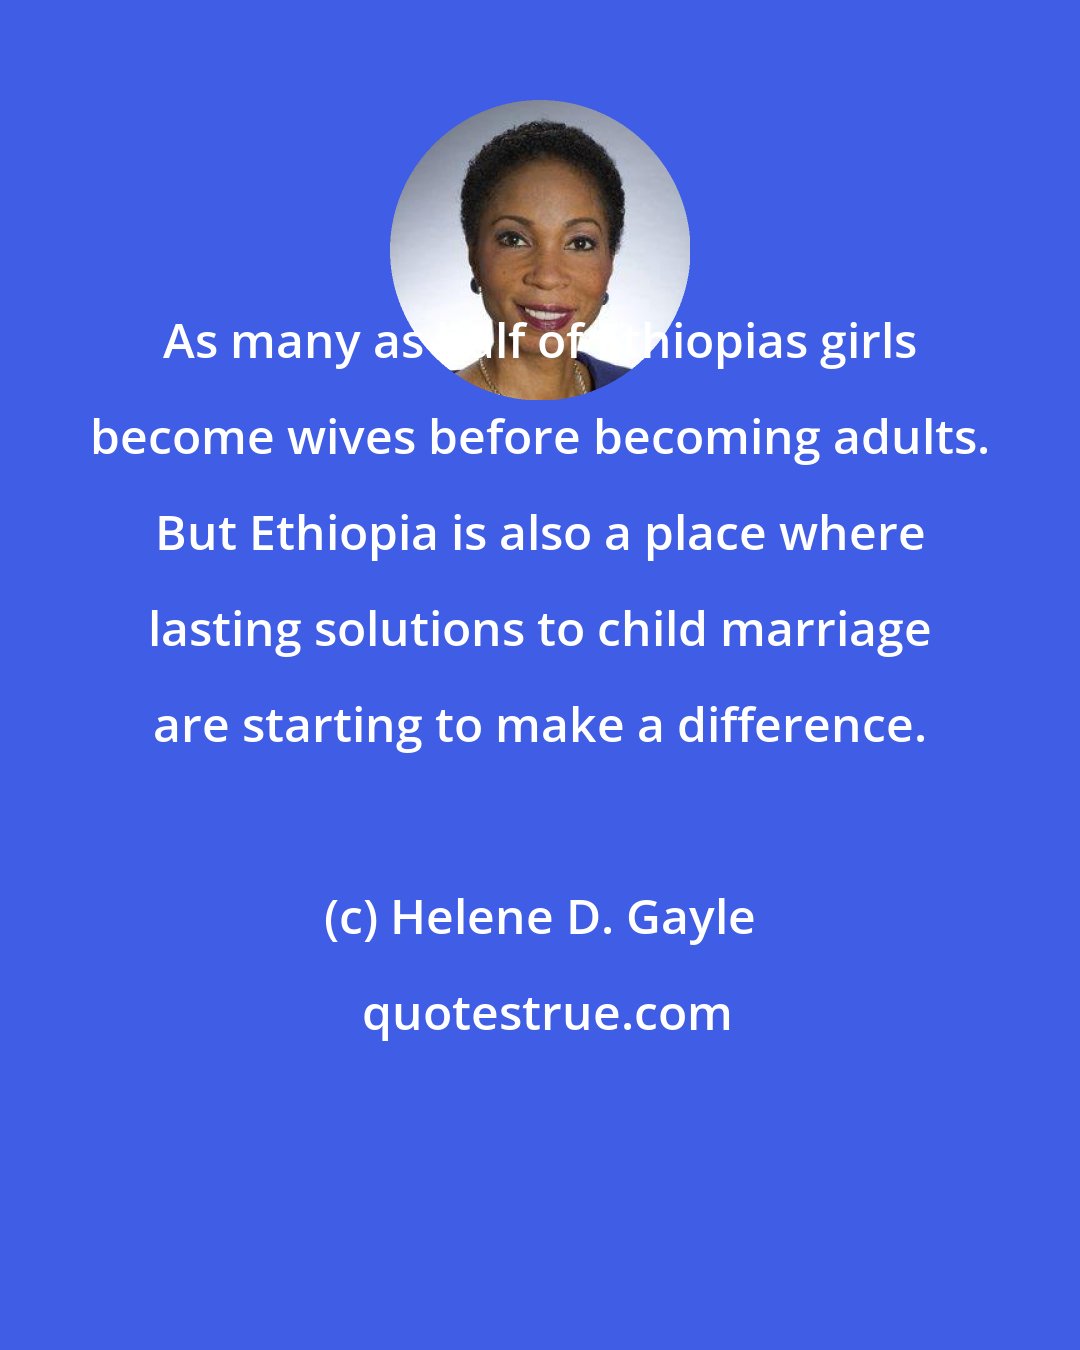 Helene D. Gayle: As many as half of Ethiopias girls become wives before becoming adults. But Ethiopia is also a place where lasting solutions to child marriage are starting to make a difference.